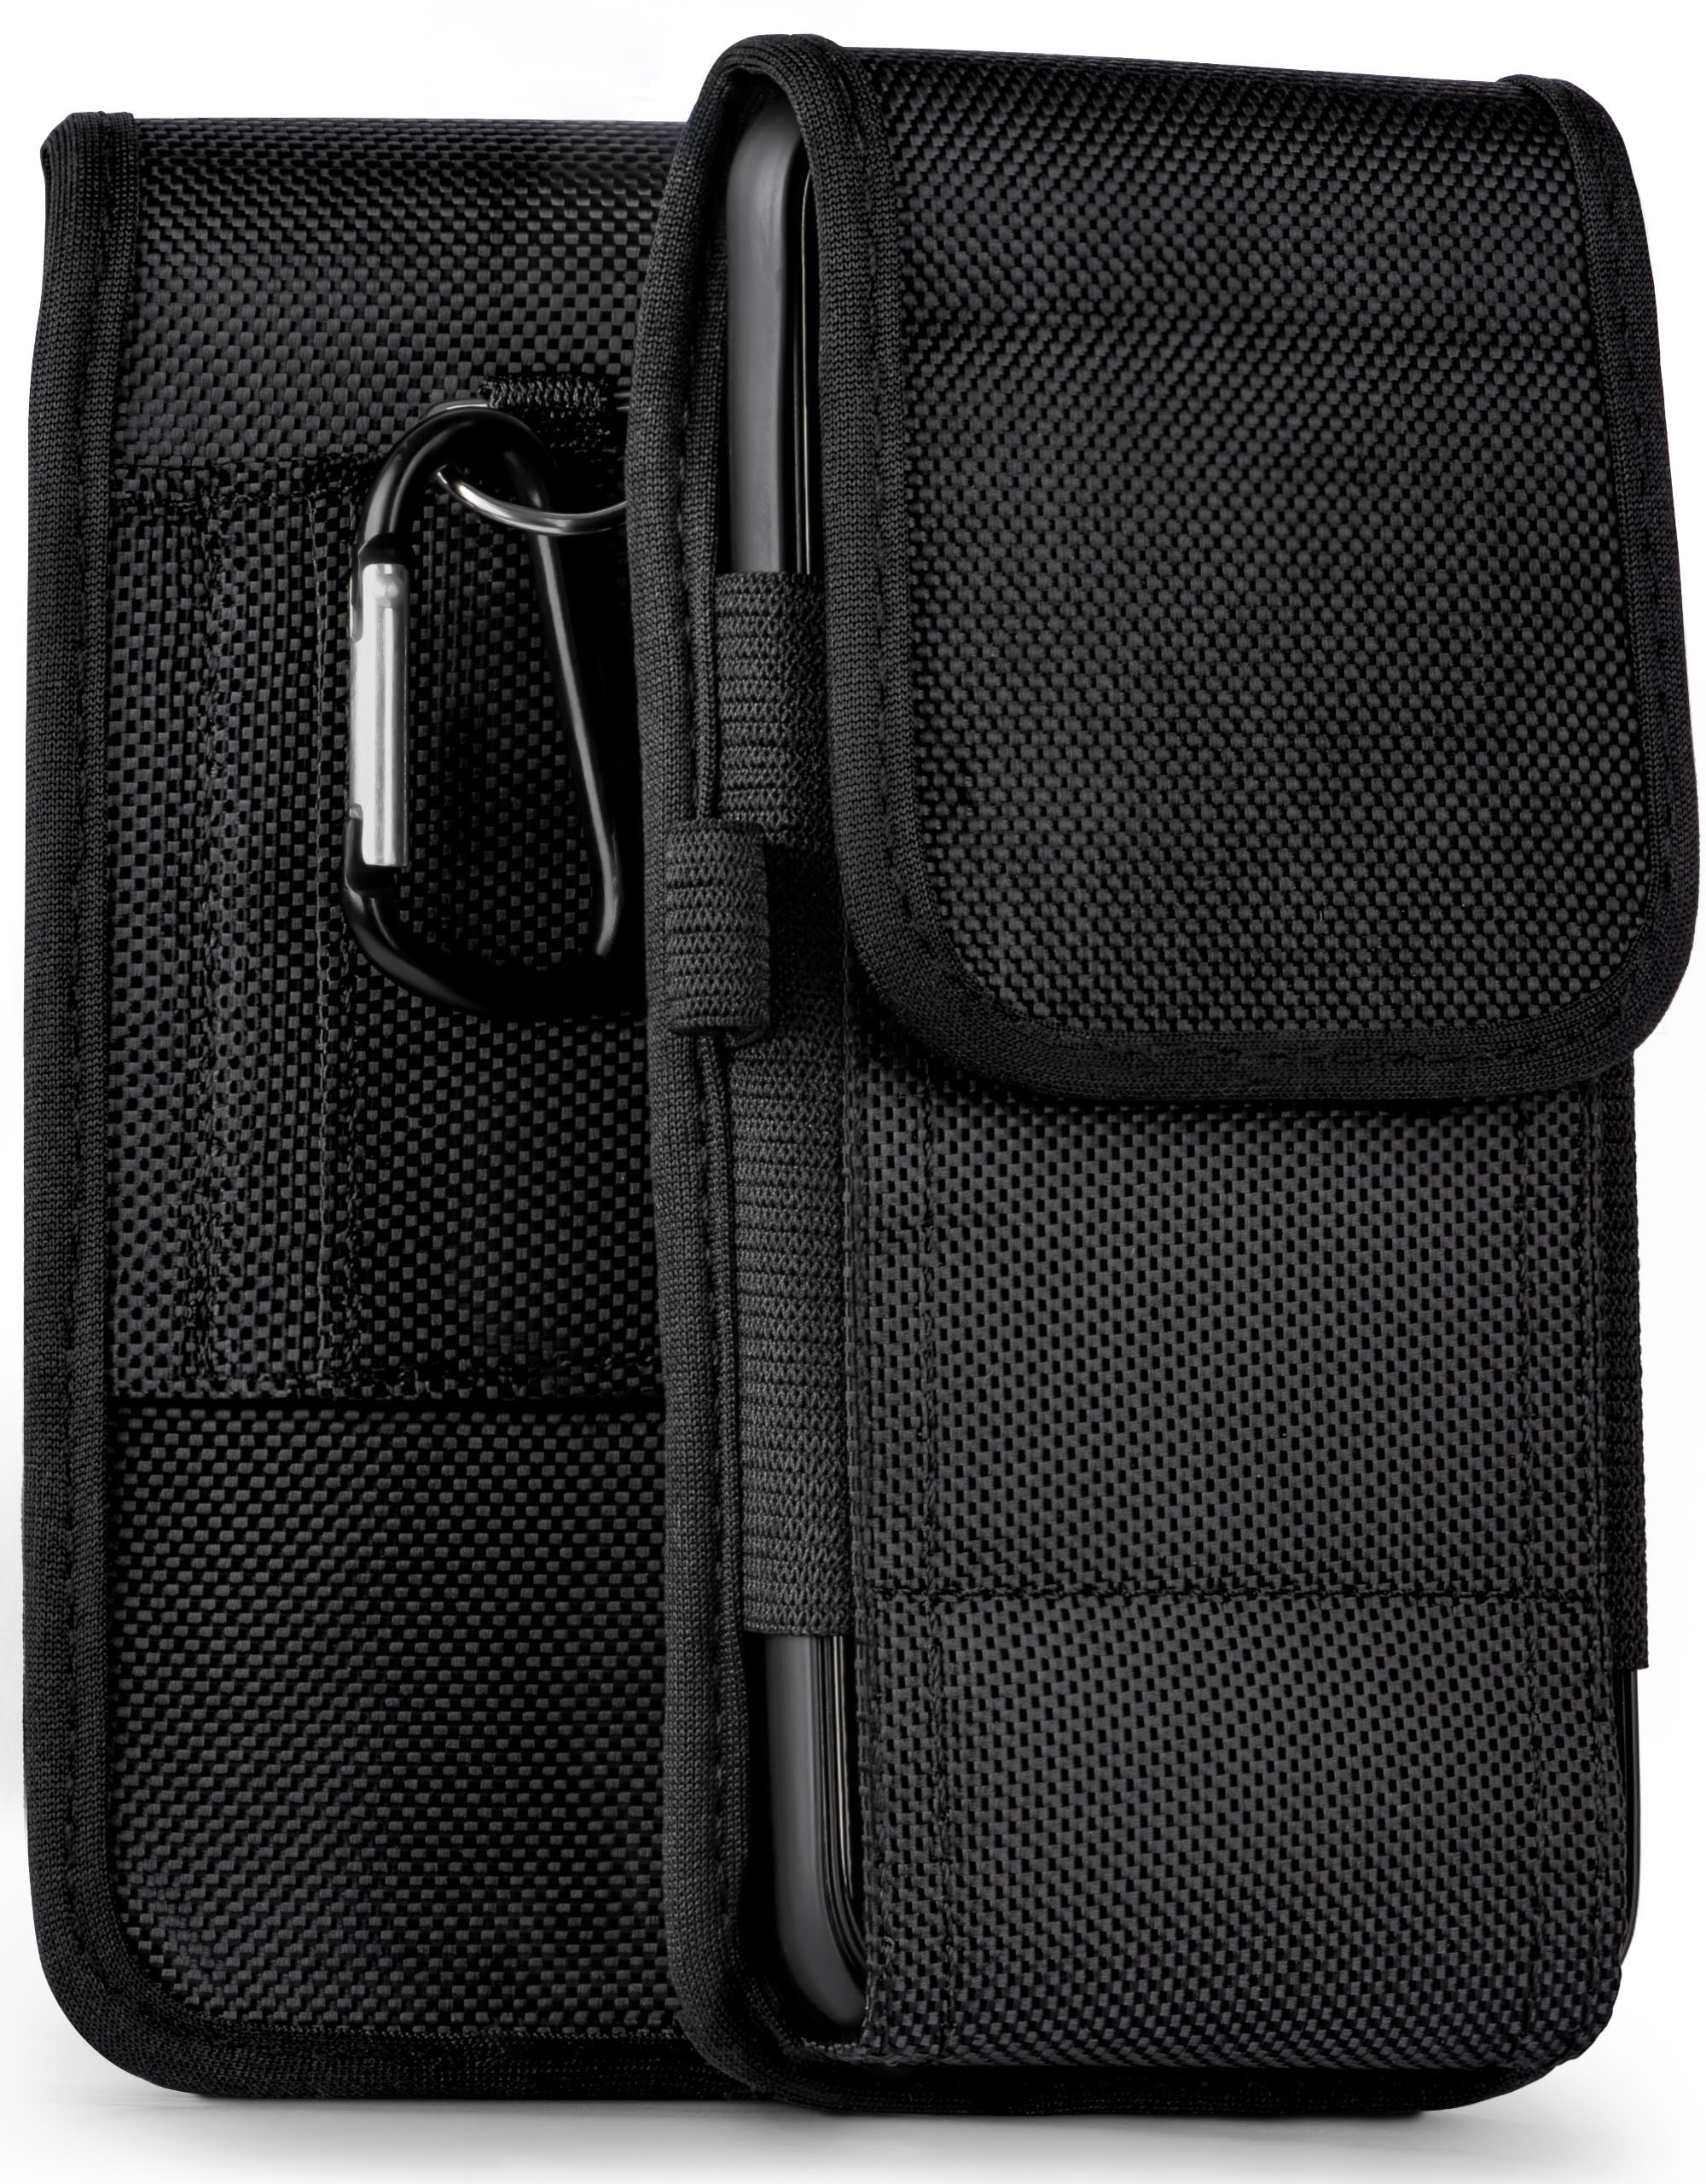 Trail X3-02, Holster, Case, MOEX Agility Nokia,